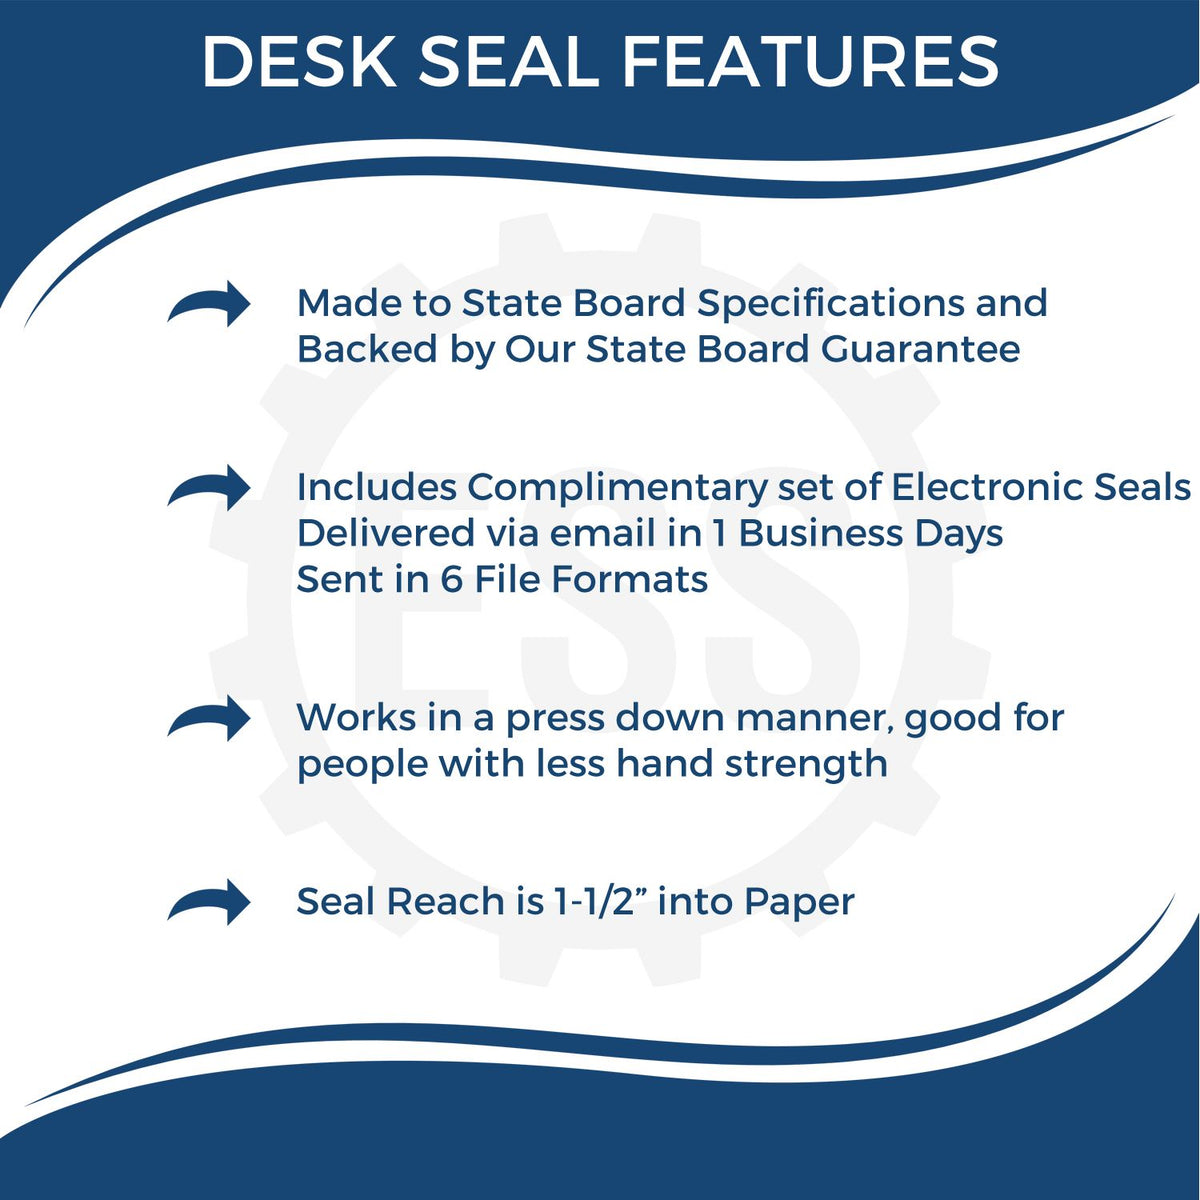 A picture of an infographic highlighting the selling points for the Tennessee Geologist Desk Seal